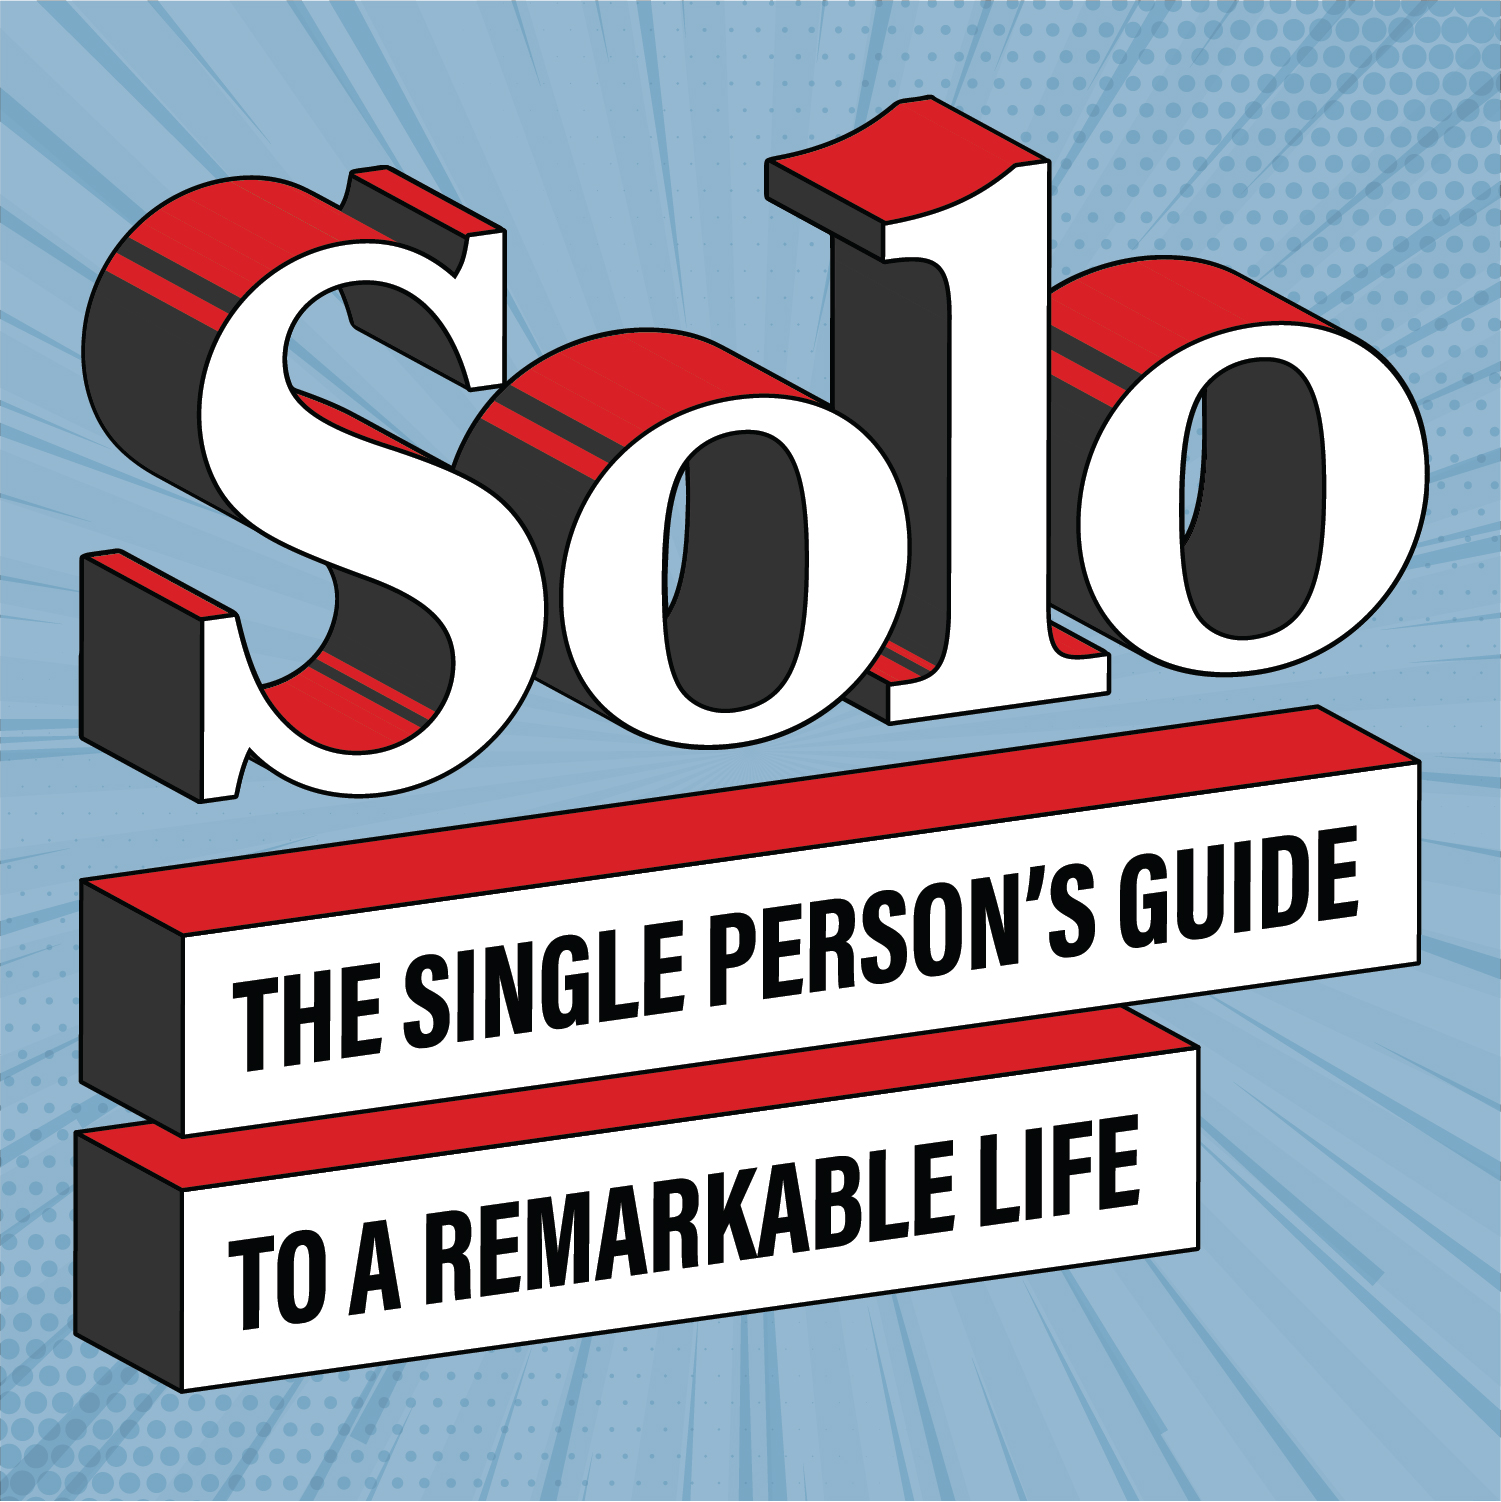 Solo: The Single Person’s Guide to a Remarkable Life Logo